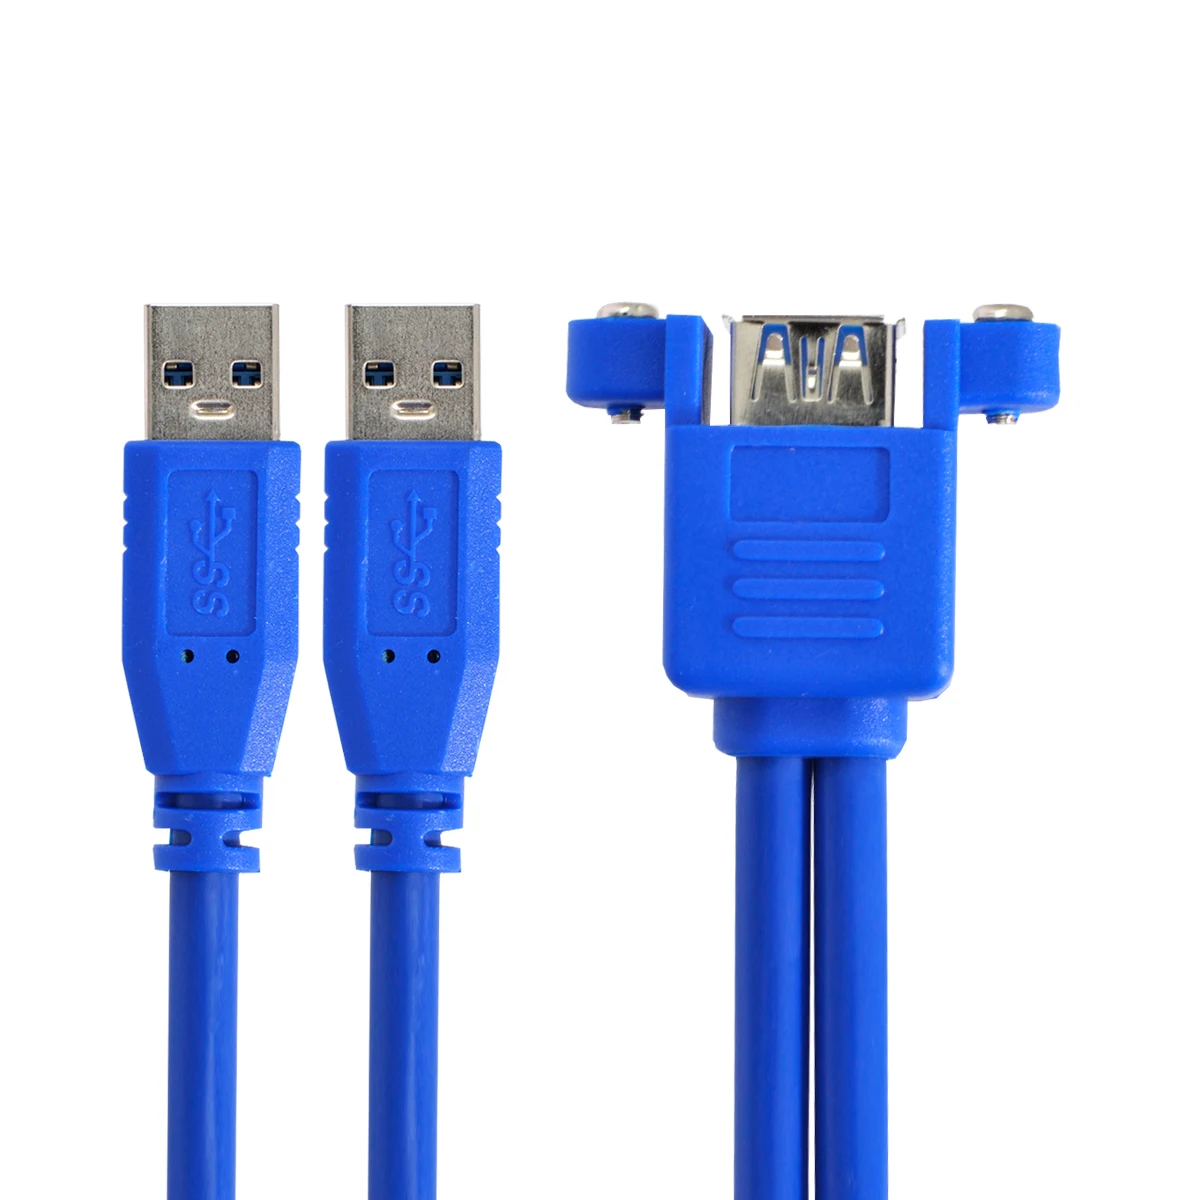 

Cablecc Combo Dual USB 3.0 Male to Stackable Female Extension Cable 50cm with Screw Panel Mount Holes